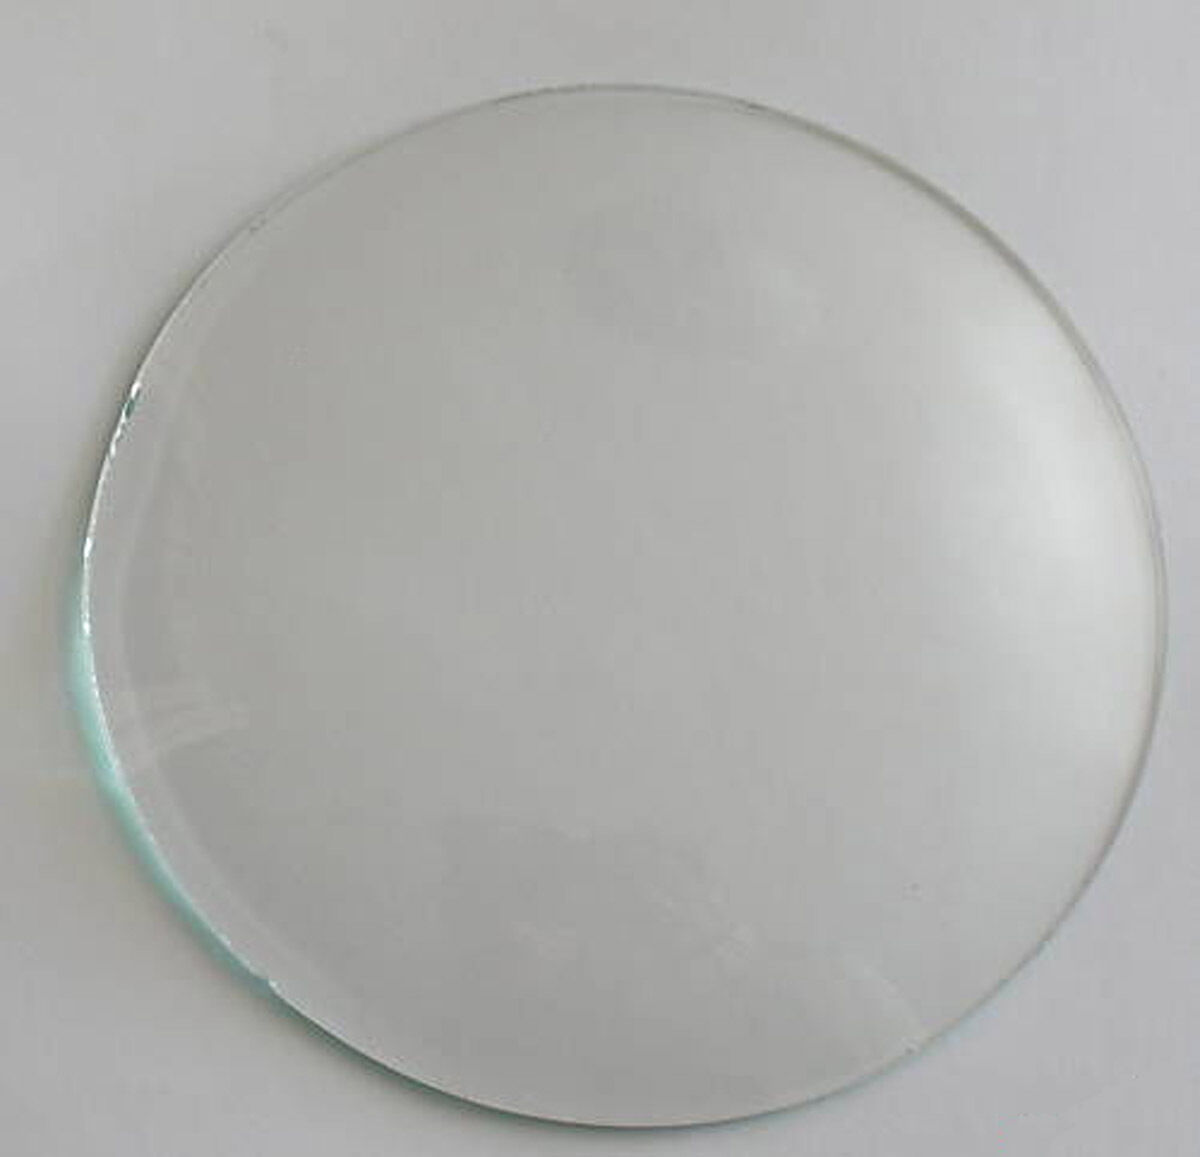 New 1 Piece Of Small Convex Clock, Auto, Repair Glass - Choose 4" To 5-15/16"